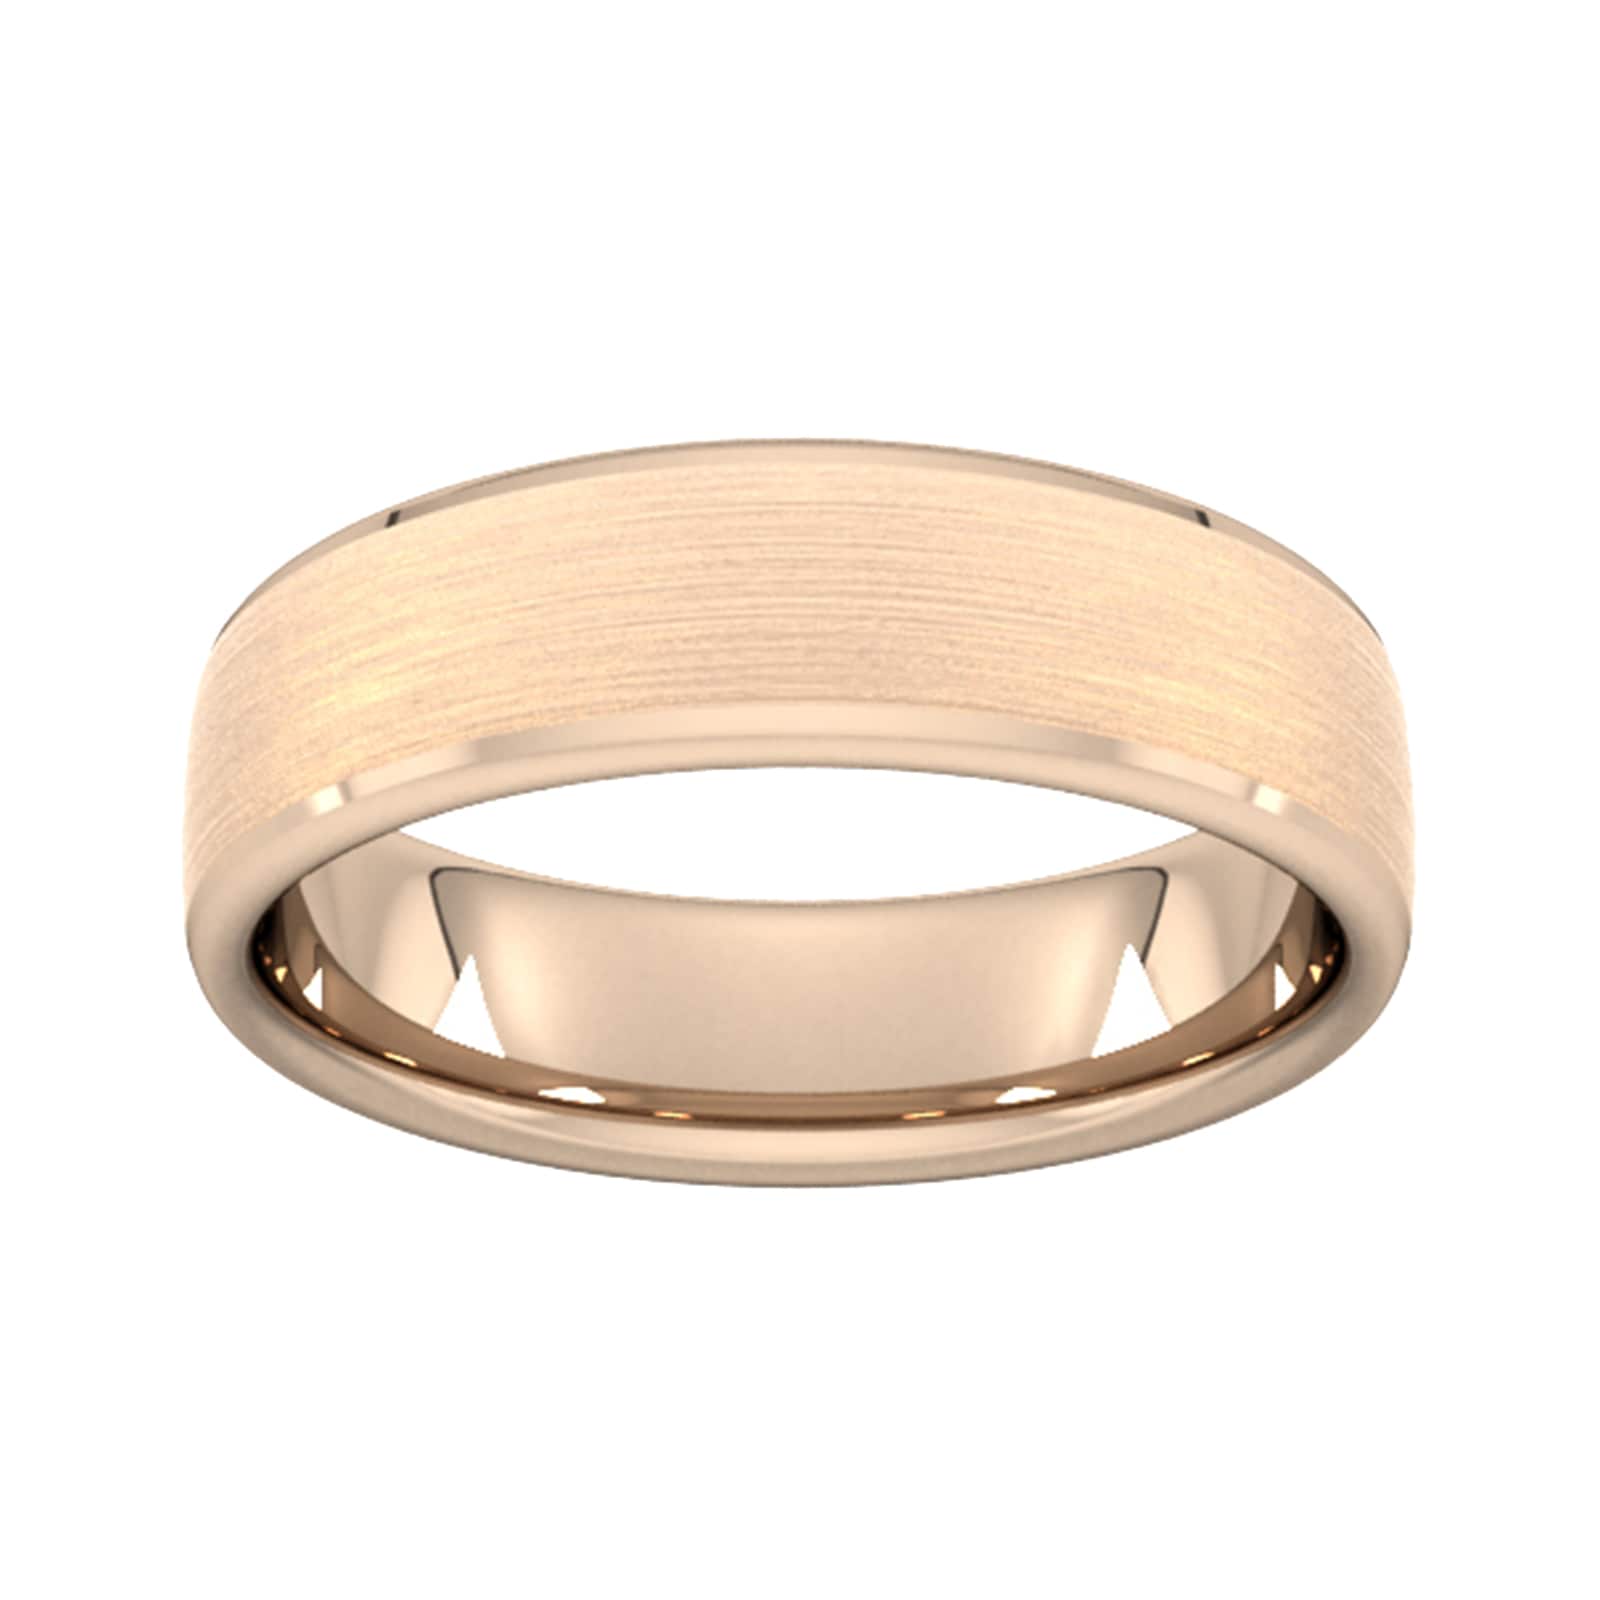 6mm Flat Court Heavy Polished Chamfered Edges With Matt Centre Wedding Ring In 9 Carat Rose Gold - Ring Size M